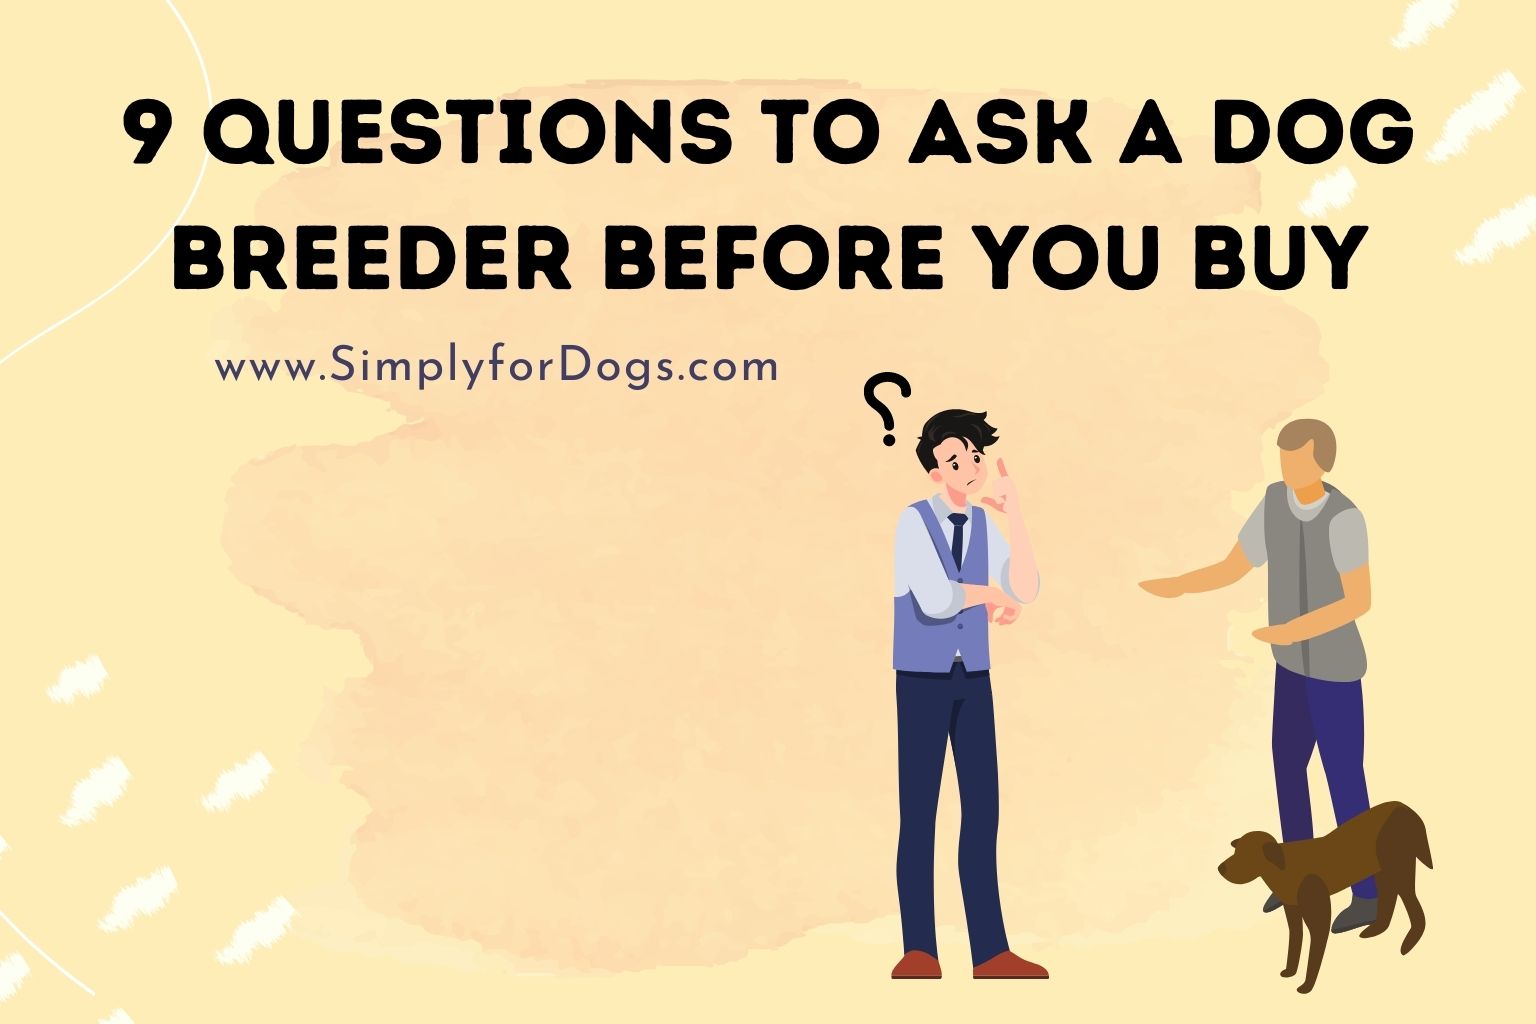 9 Questions to Ask a Dog Breeder Before You Buy